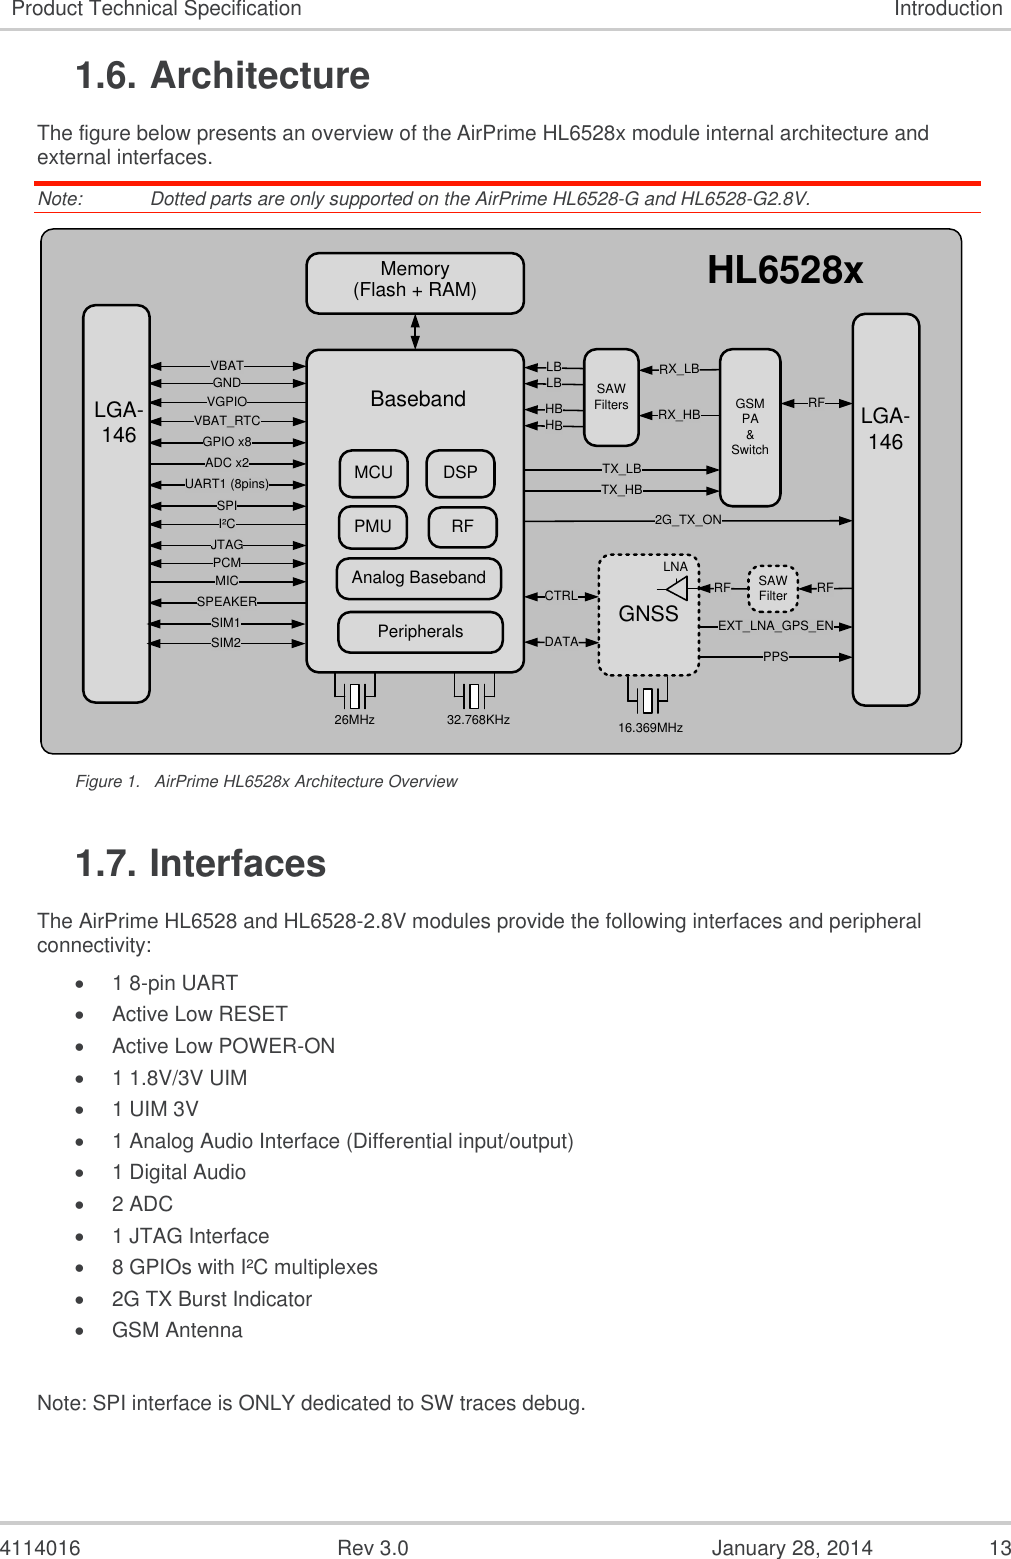  4114016  Rev 3.0  January 28, 2014  13 Product Technical Specification Introduction 1.6. Architecture The figure below presents an overview of the AirPrime HL6528x module internal architecture and external interfaces. Note:   Dotted parts are only supported on the AirPrime HL6528-G and HL6528-G2.8V. HL6528xMemory(Flash + RAM)GNSSSAWFilters GSMPA&amp;SwitchCTRLDATA16.369MHz26MHz 32.768KHzUART1 (8pins)SPIVBATGNDVGPIOVBAT_RTCGPIO x8ADC x2I²CMICSPEAKERPCMRFRFJTAGLGA-146 BasebandEXT_LNA_GPS_ENPPSSAWFilterRFLNASIM2SIM1MCU DSPPMU RFAnalog BasebandPeripheralsRX_HBRX_LBLBLBHBHBTX_LBTX_HBLGA-146 2G_TX_ON Figure 1.  AirPrime HL6528x Architecture Overview 1.7. Interfaces The AirPrime HL6528 and HL6528-2.8V modules provide the following interfaces and peripheral connectivity:  1 8-pin UART  Active Low RESET   Active Low POWER-ON   1 1.8V/3V UIM   1 UIM 3V  1 Analog Audio Interface (Differential input/output)  1 Digital Audio  2 ADC  1 JTAG Interface  8 GPIOs with I²C multiplexes  2G TX Burst Indicator  GSM Antenna  Note: SPI interface is ONLY dedicated to SW traces debug. 